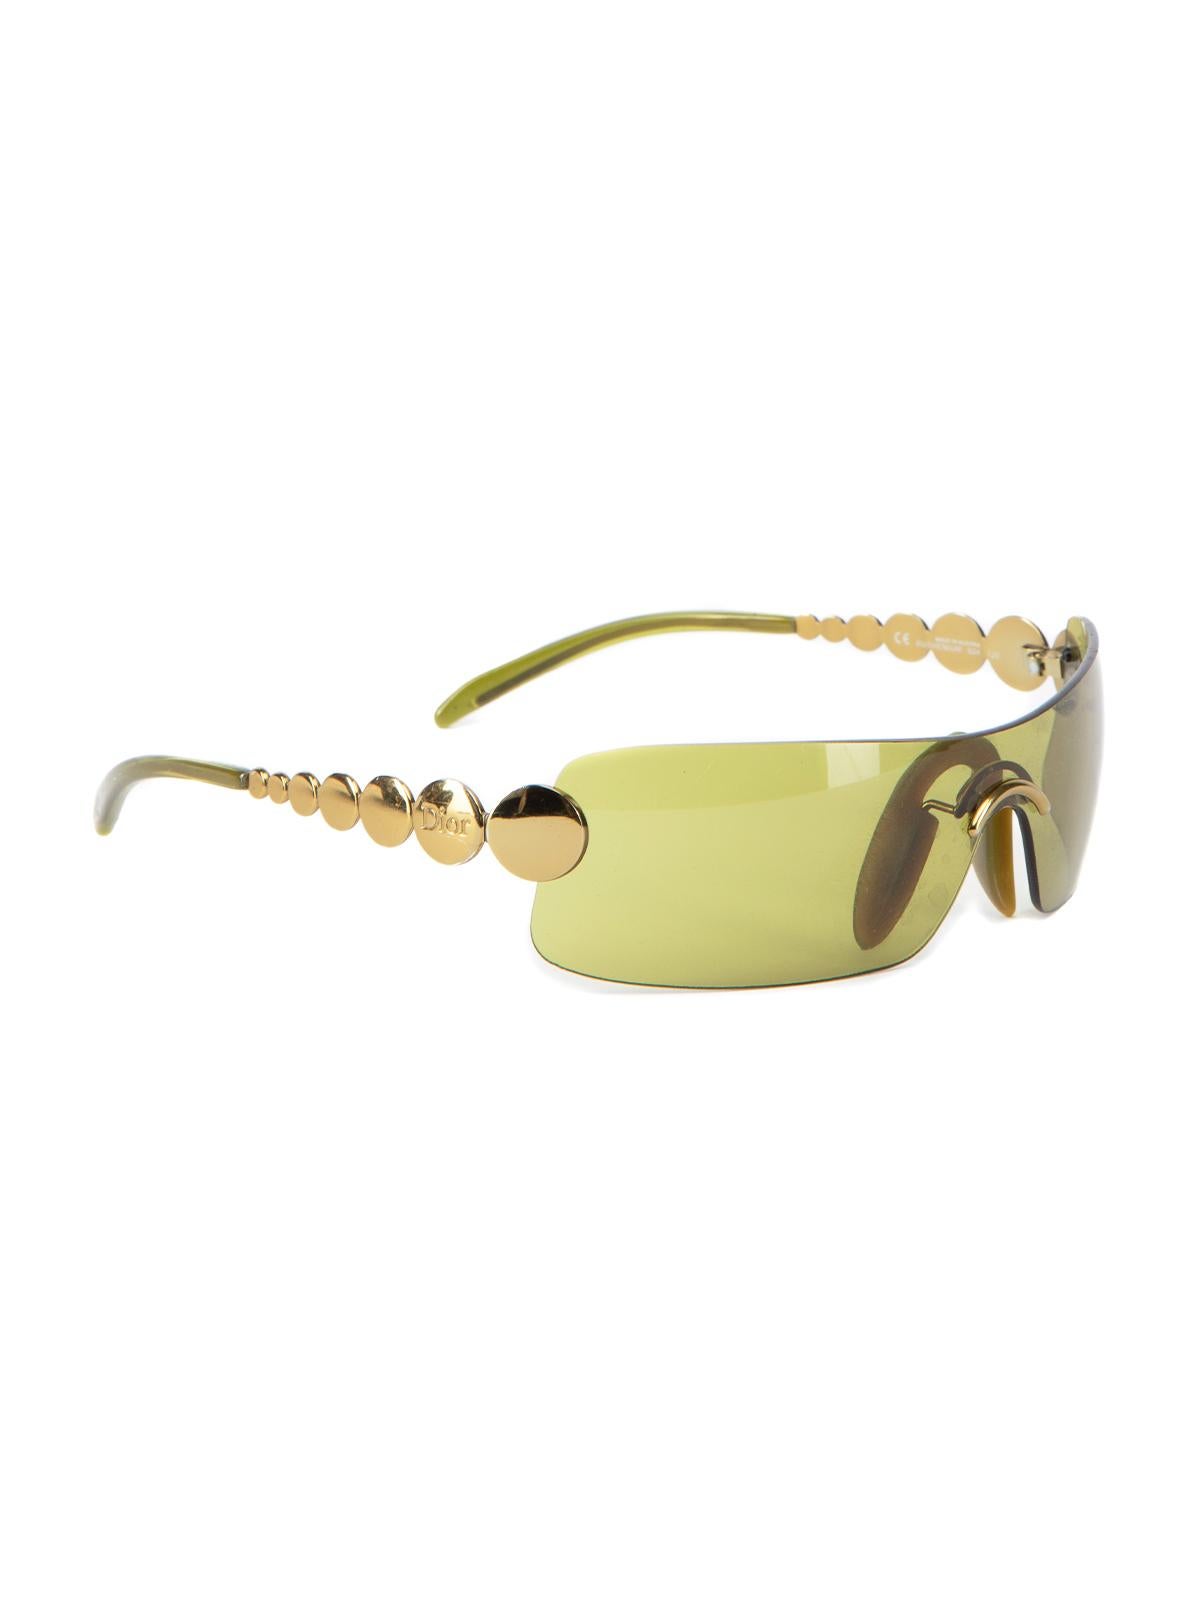 CONDITION is Very good. Minimal wear to sunglasses is evident. Minimal wear to the lens and arms where light scuffs can be seen on this used Christian Dior designer resale item. Details Green Gold tone circular design on arms One piece lens Gold